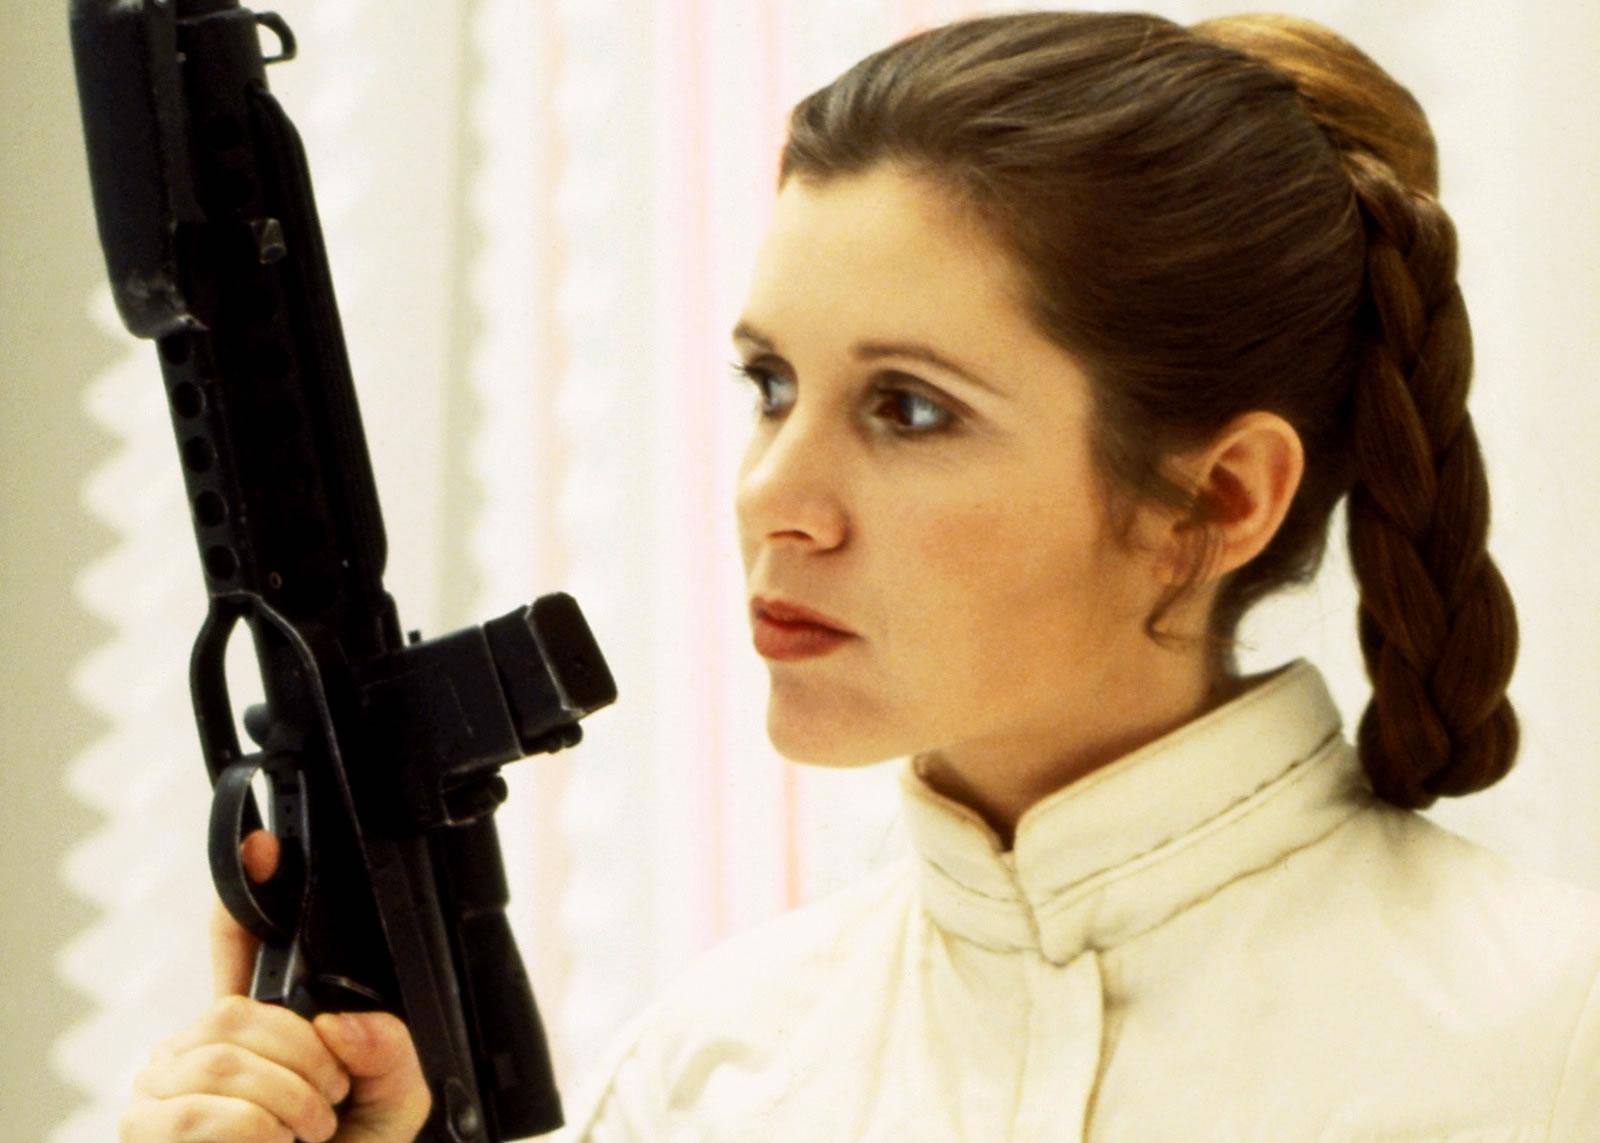 carrie-fisher-star-wars